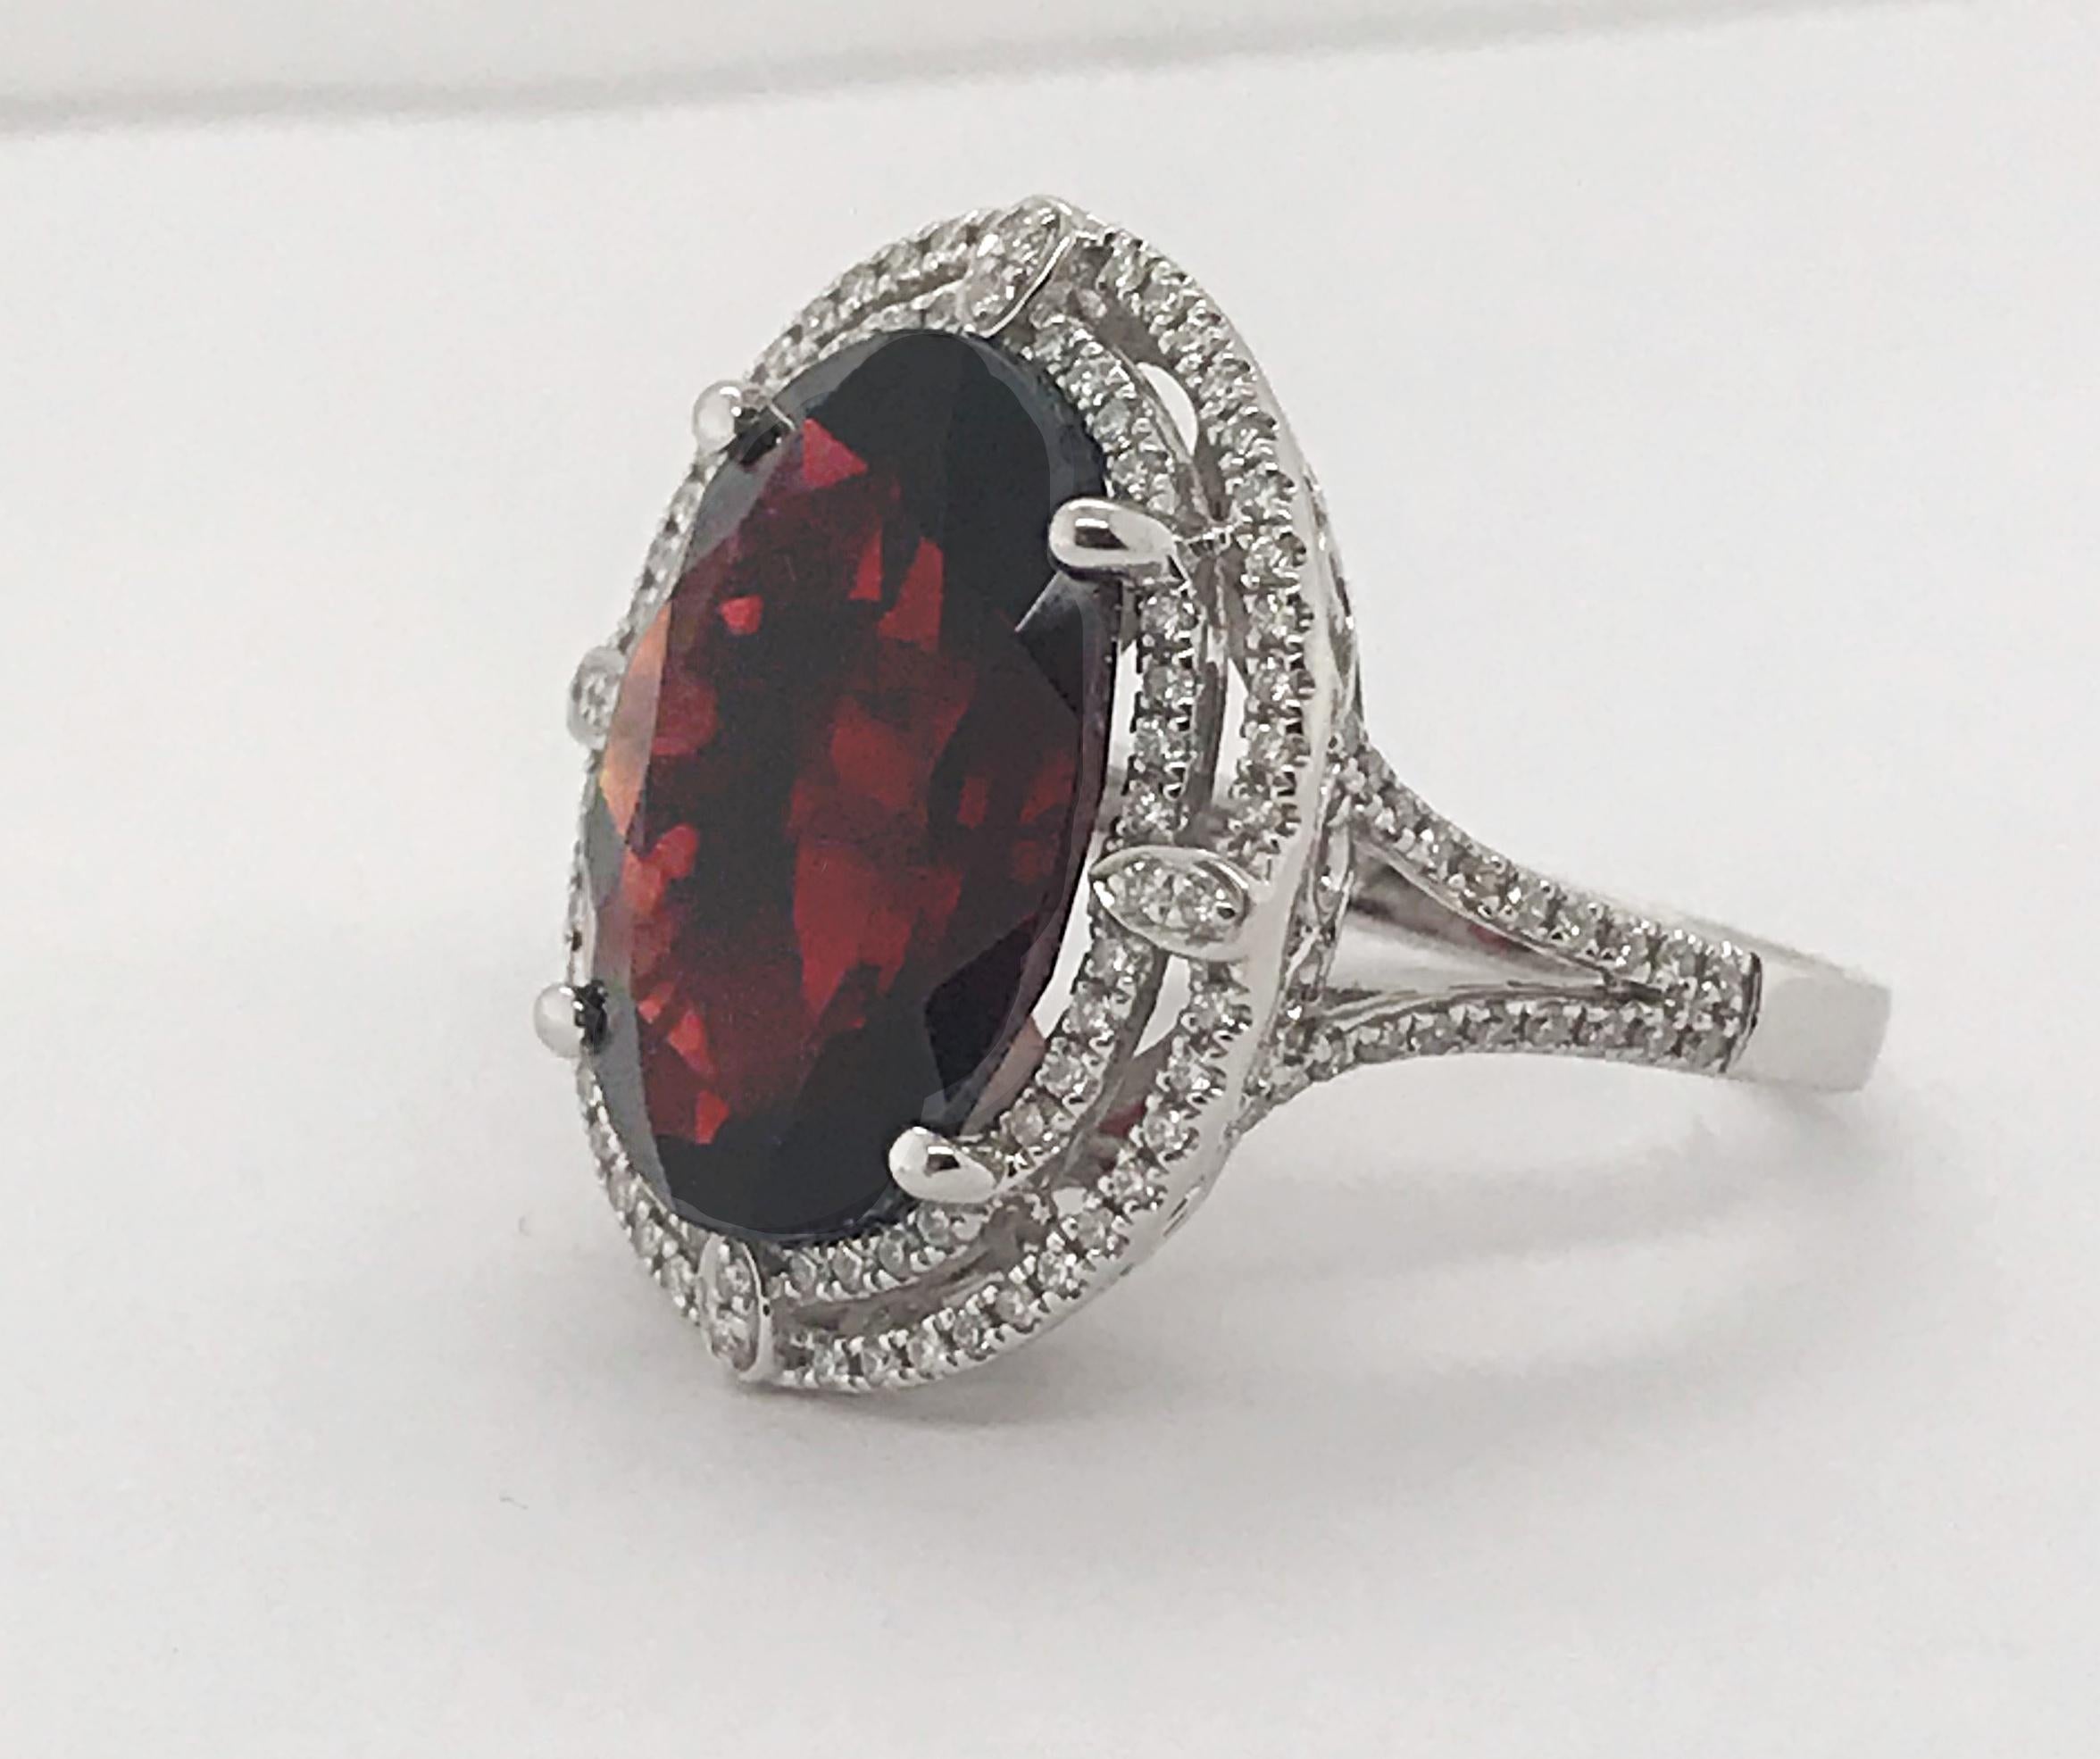 Beautiful oval cut Garnet that is 14.08ct's and set in 14kt white gold. The ring feature 1.20 carats of round brilliant cut diamonds. 

Garnet = approximately 14.08 carats 
124 diamond = approximately 1.20 carats total weight. 
Set in 14 karat white